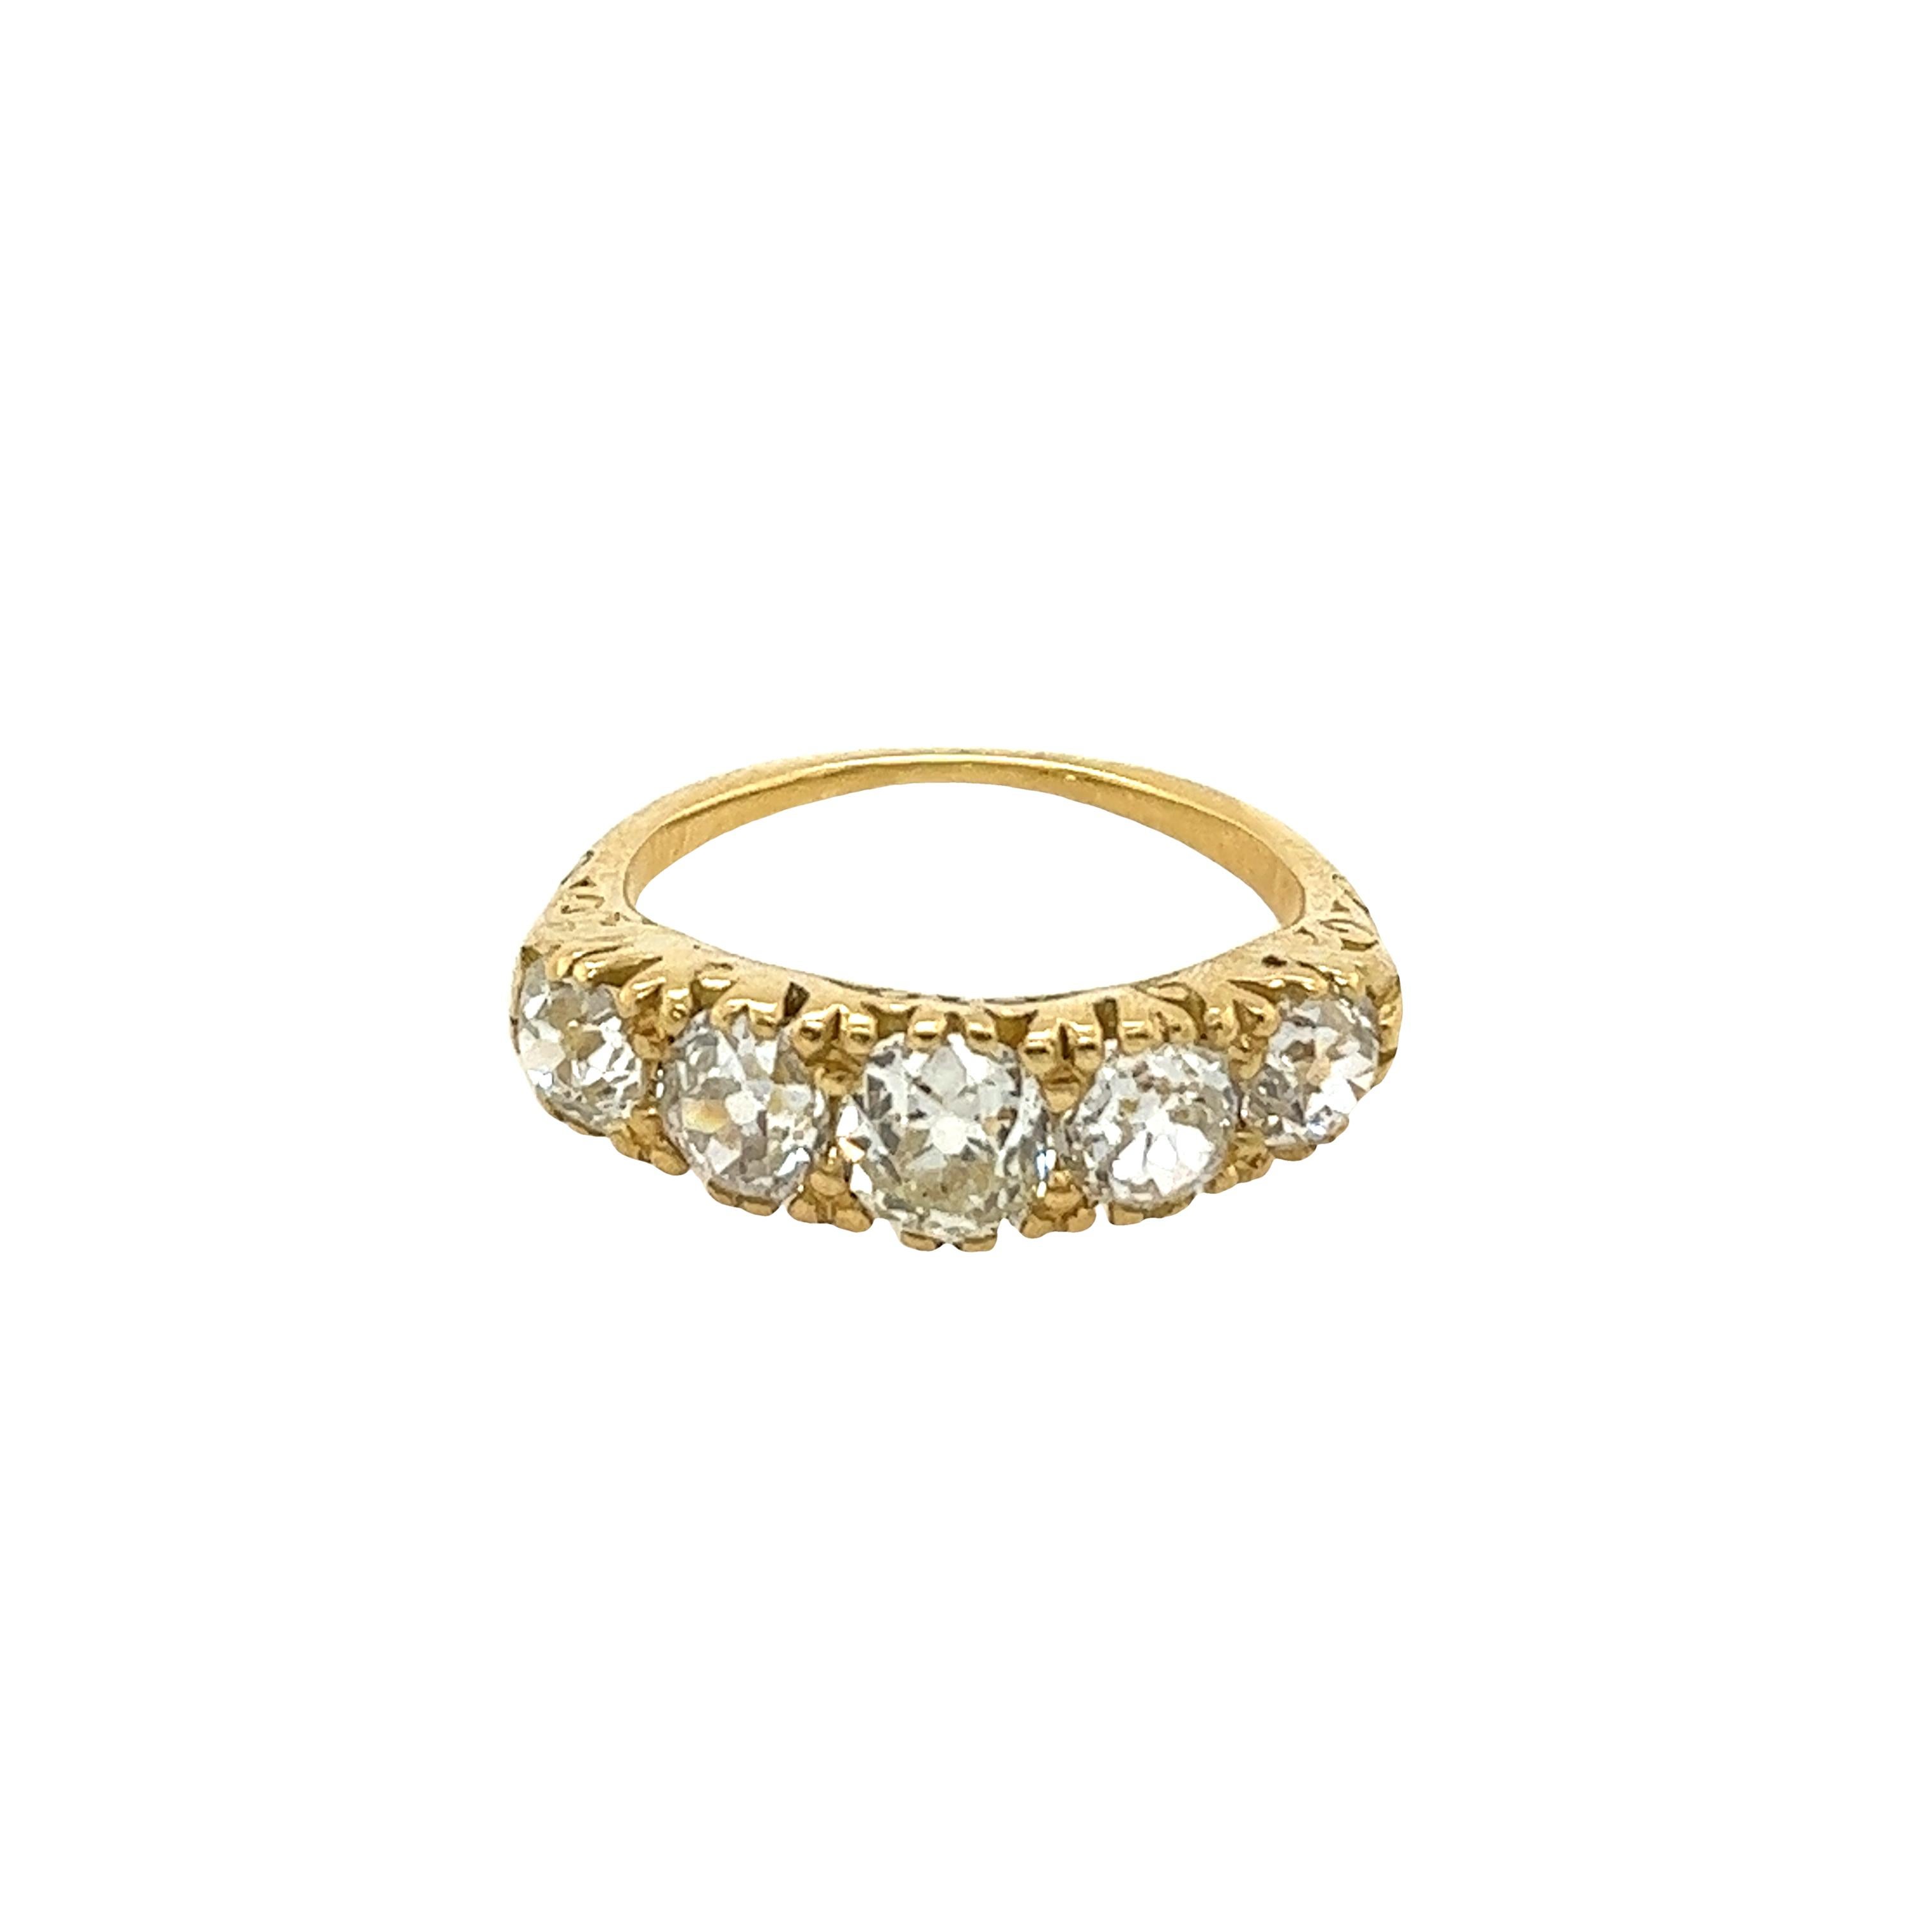 Vintage 18ct Yellow Gold Diamond 5 Stone Ring, 1.95ct Total Diamond Weight. In Excellent Condition For Sale In London, GB